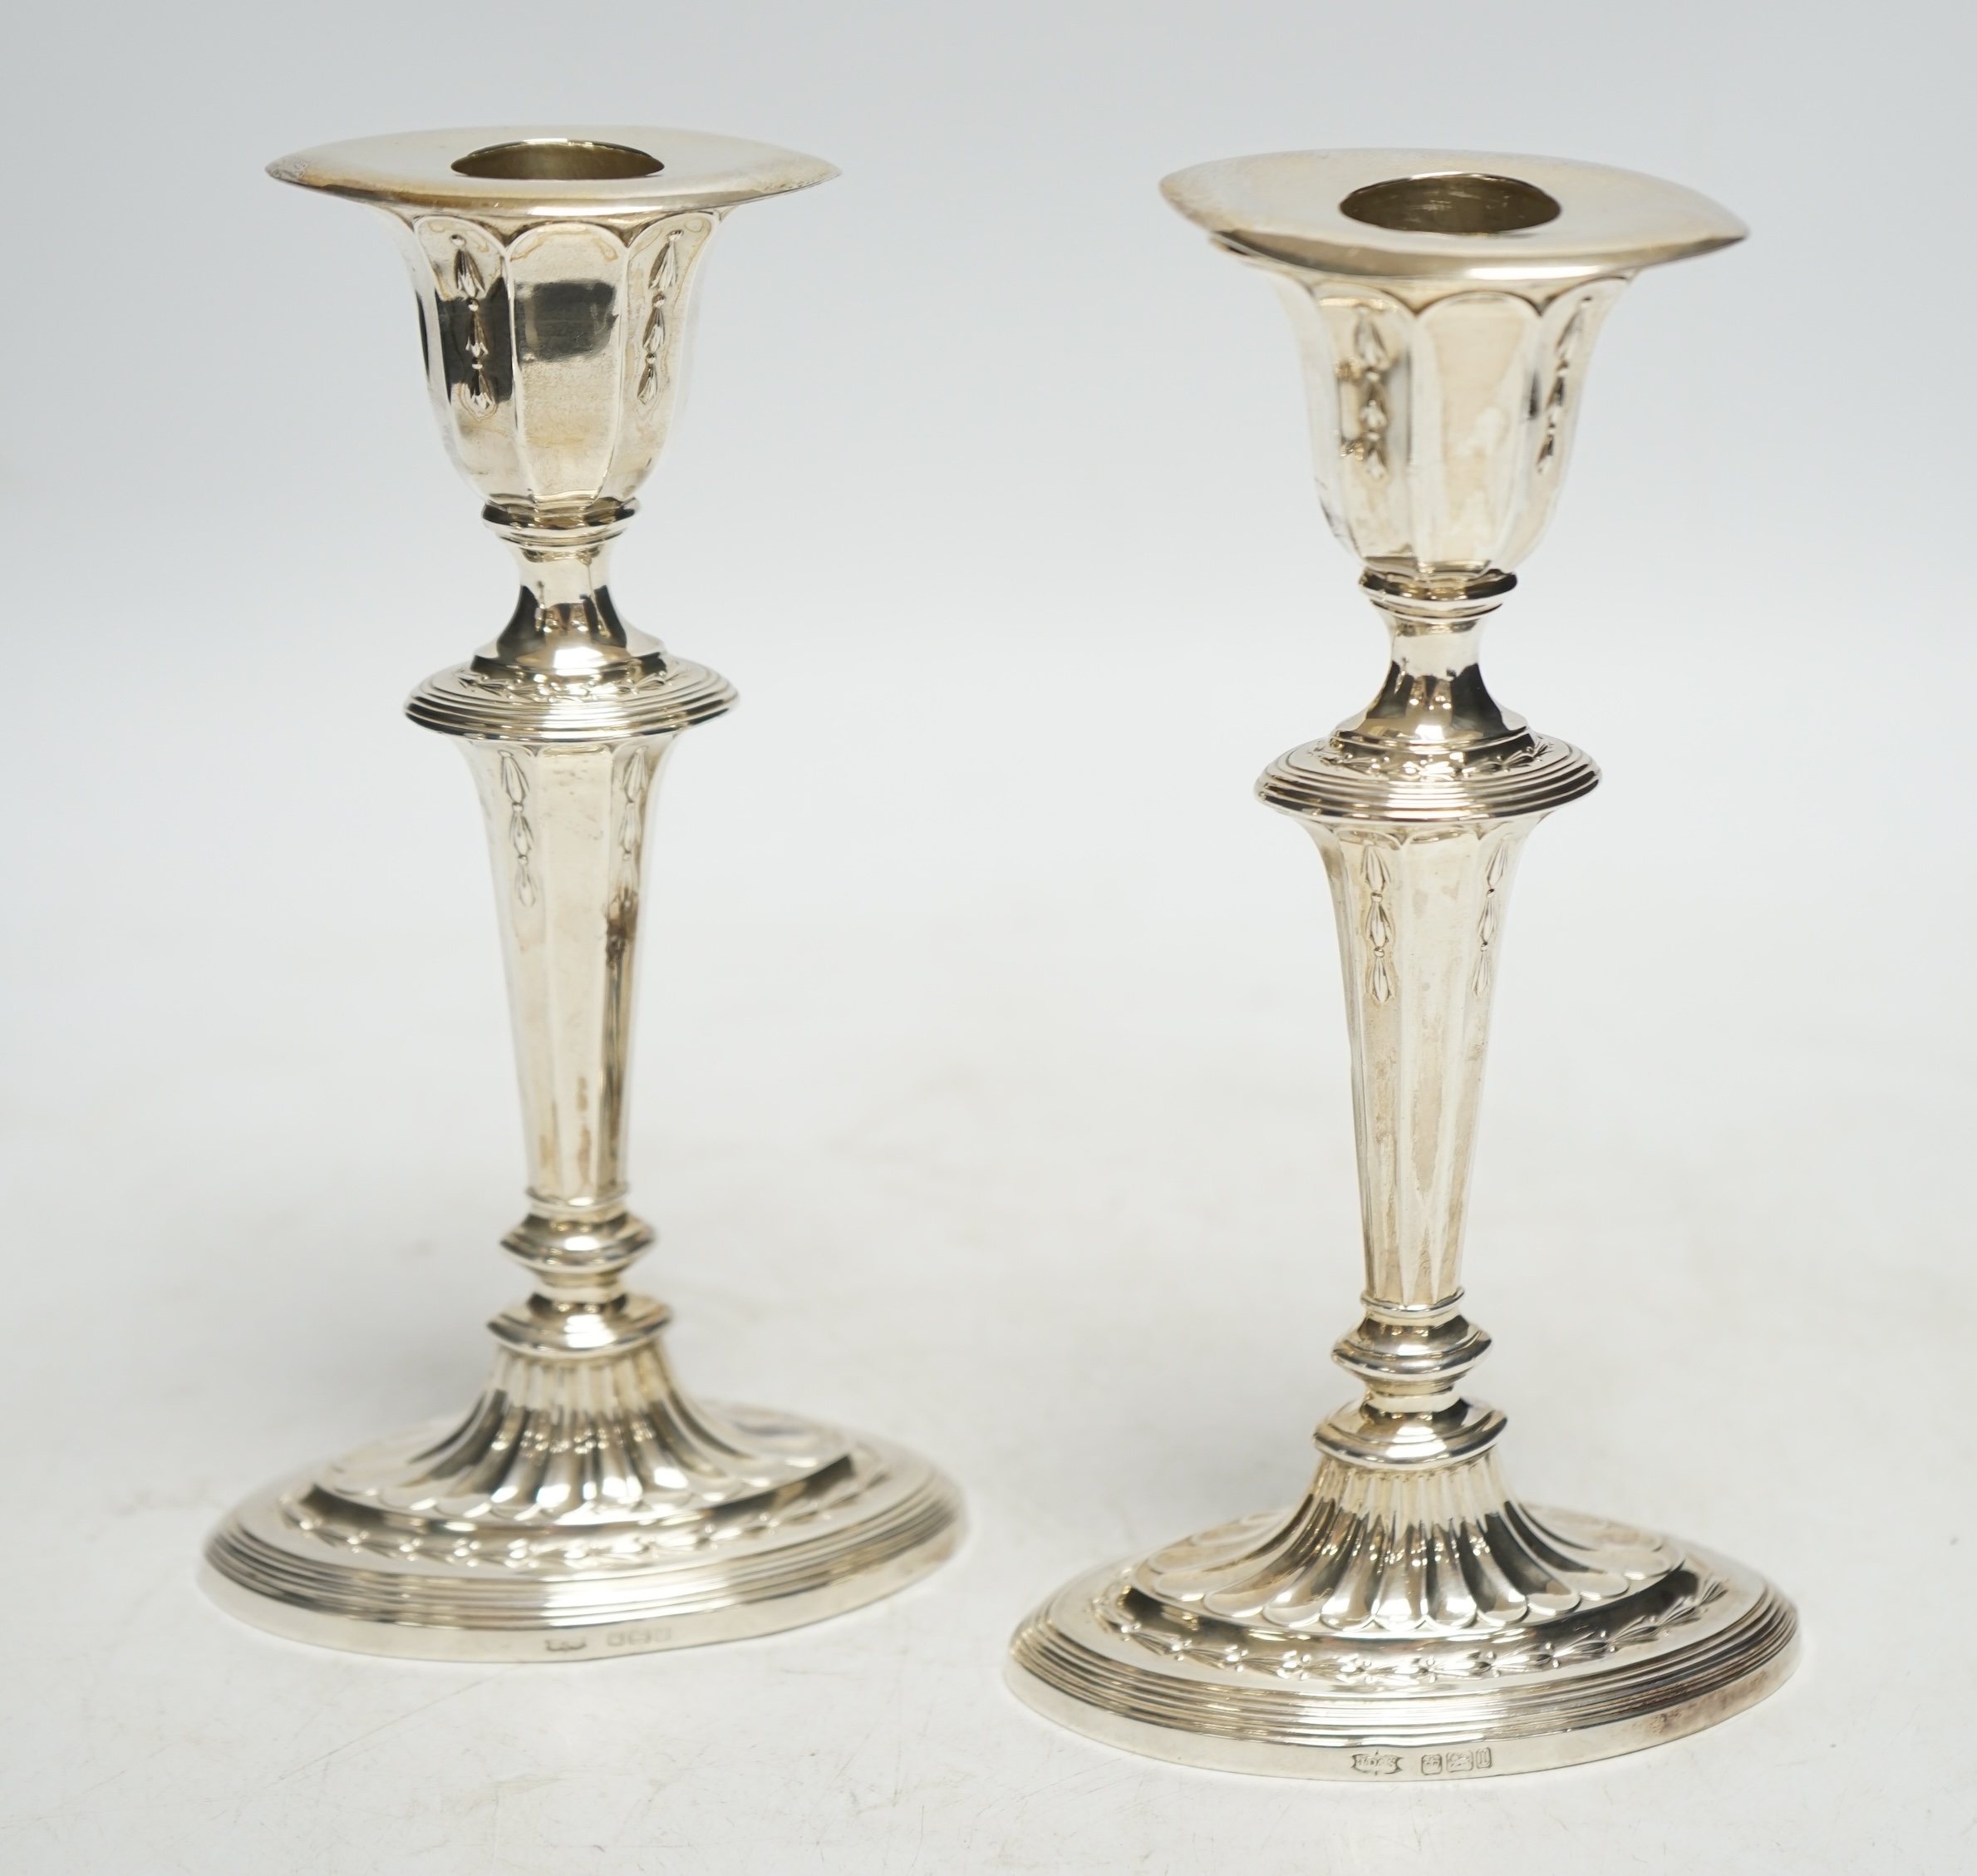 A pair of early 20th century silver oval candlesticks, by James Dixon & Sons, Ltd, Sheffield, 1903 & 1922, 17.2cm, weighted. Condition - fair